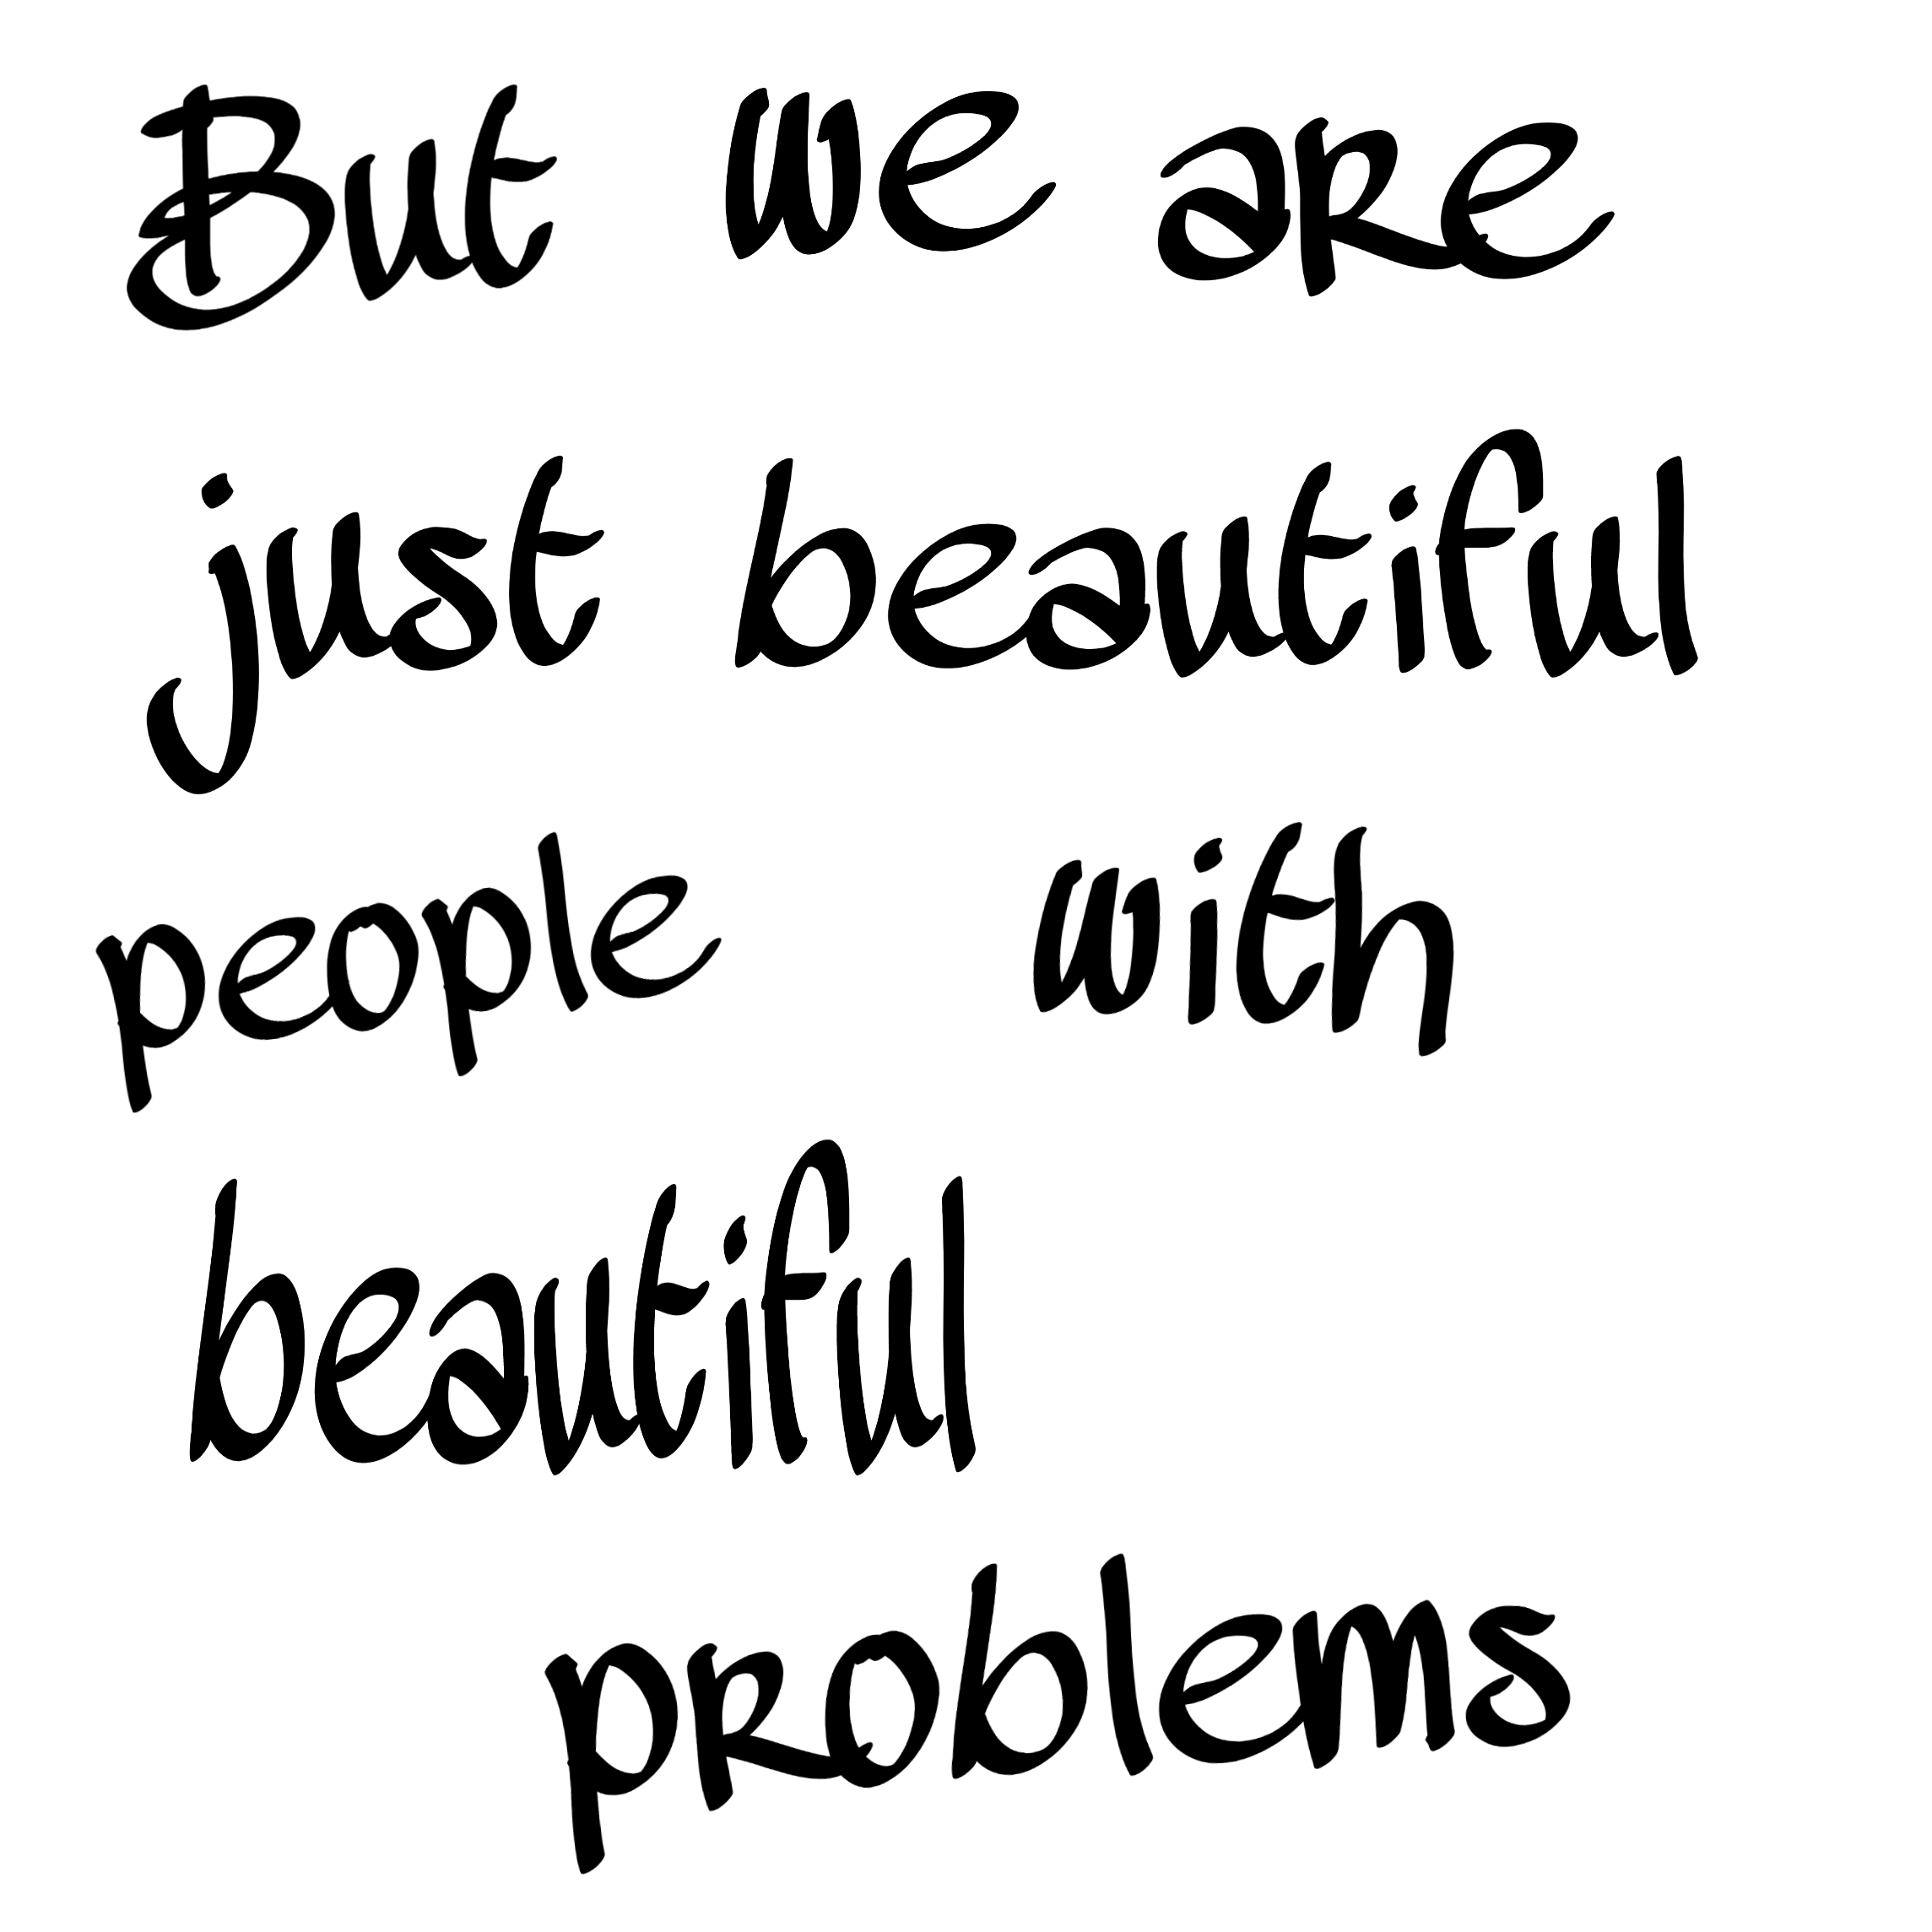 freetoedit quotes phrase beautiful sticker by @__valeska_